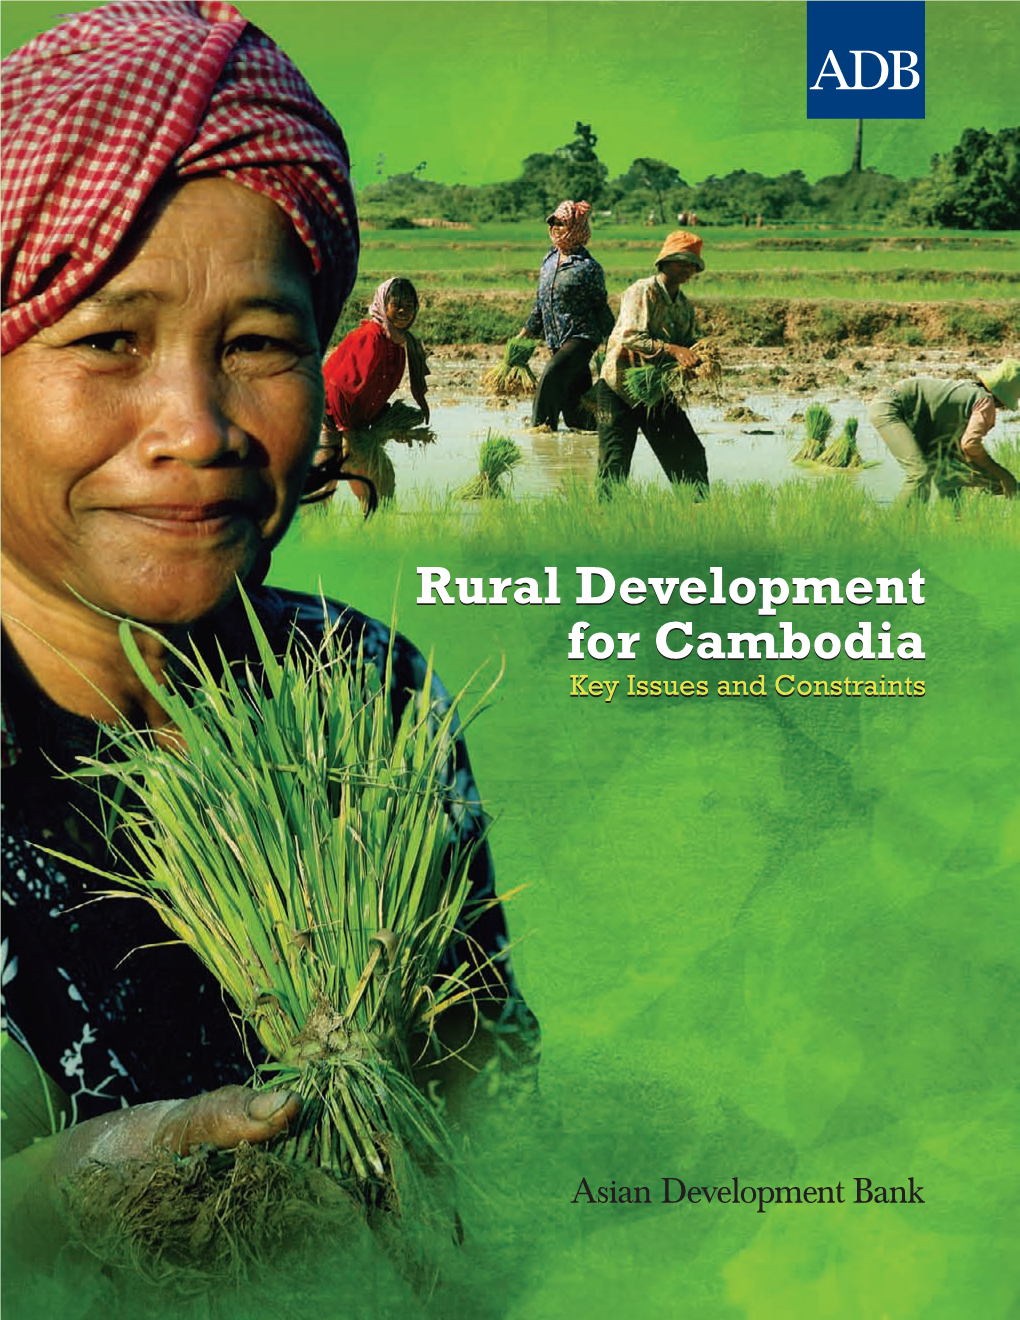 Rural Development for Cambodia Key Issues and Constraints